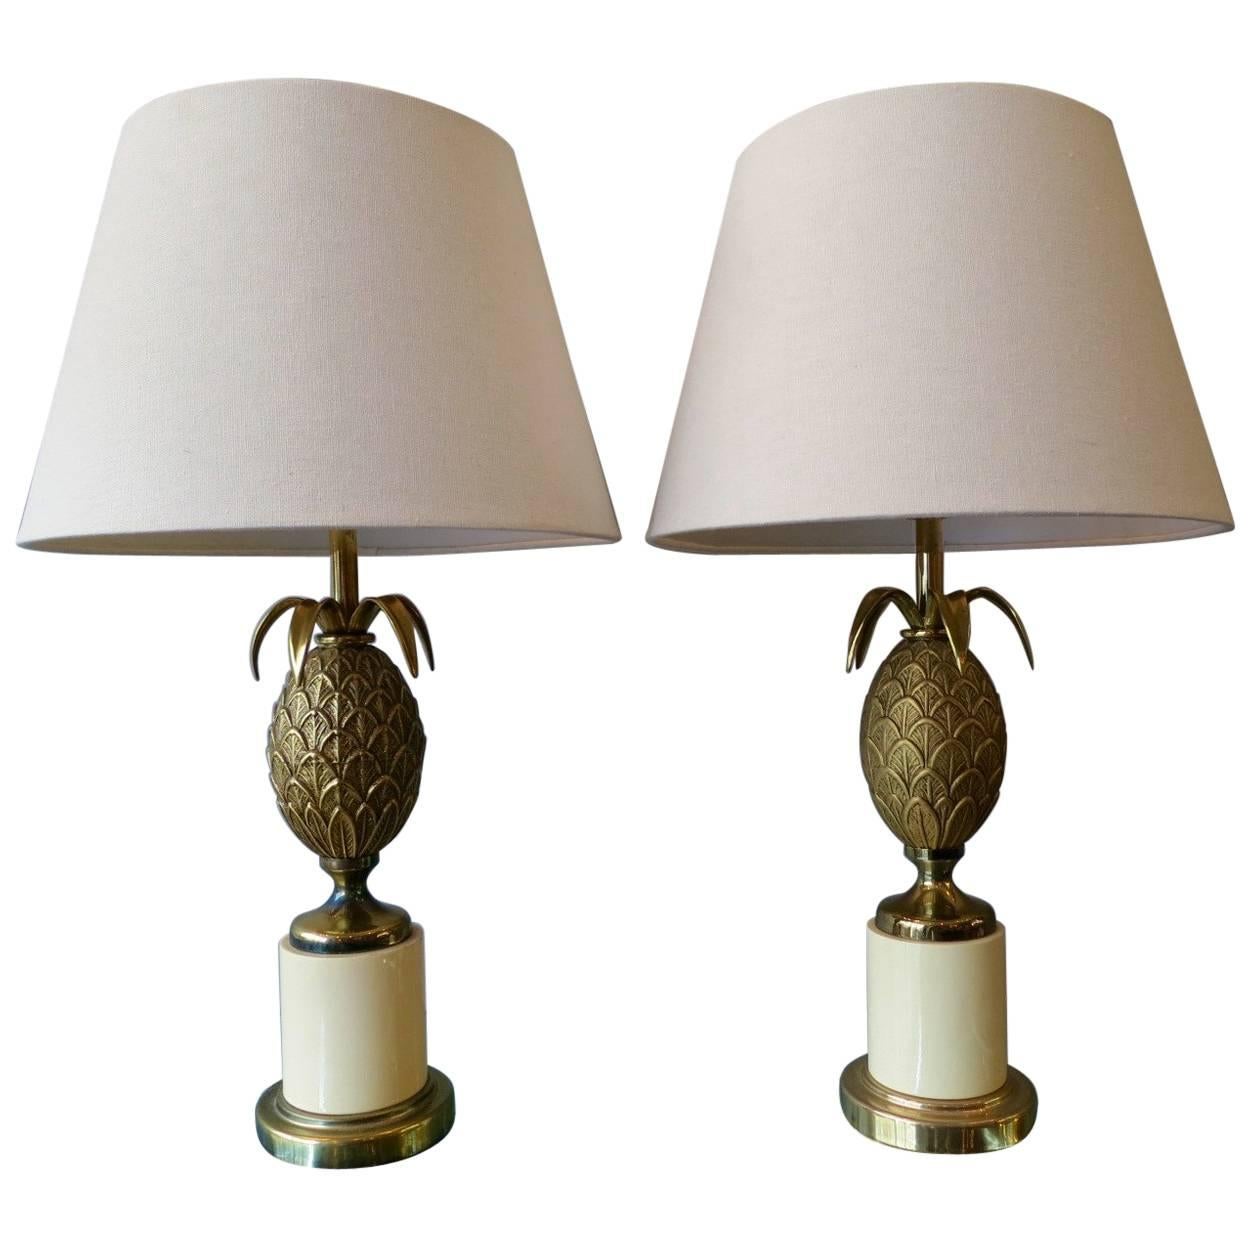 Pair of French Brass Pineapple Bedside Lamps